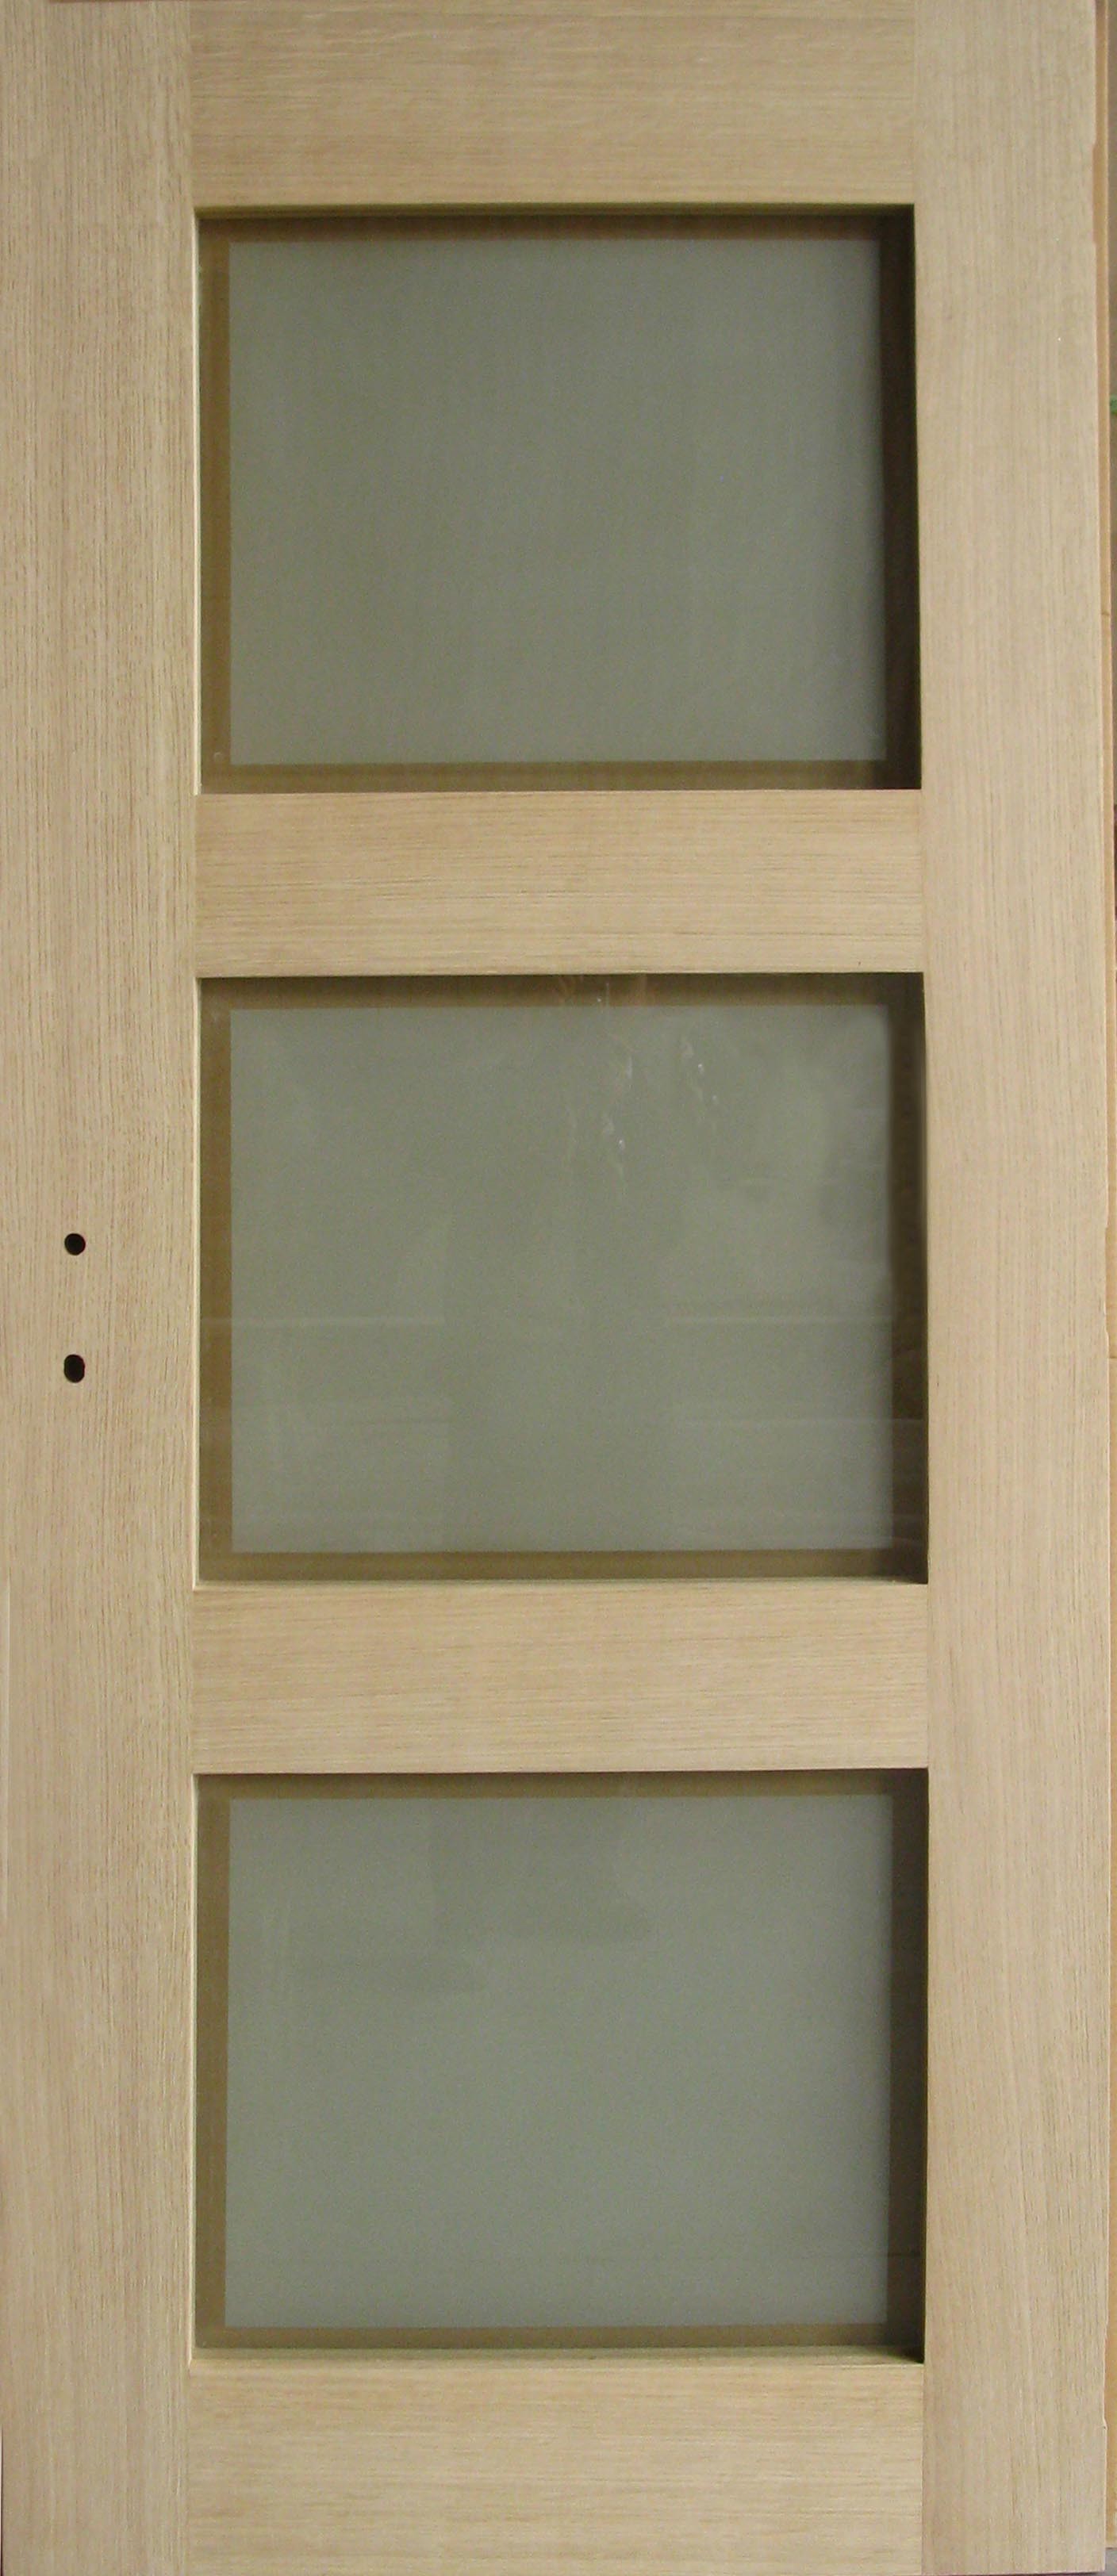 3 Glass Panel Stile and Rail Interior Wooden Doors